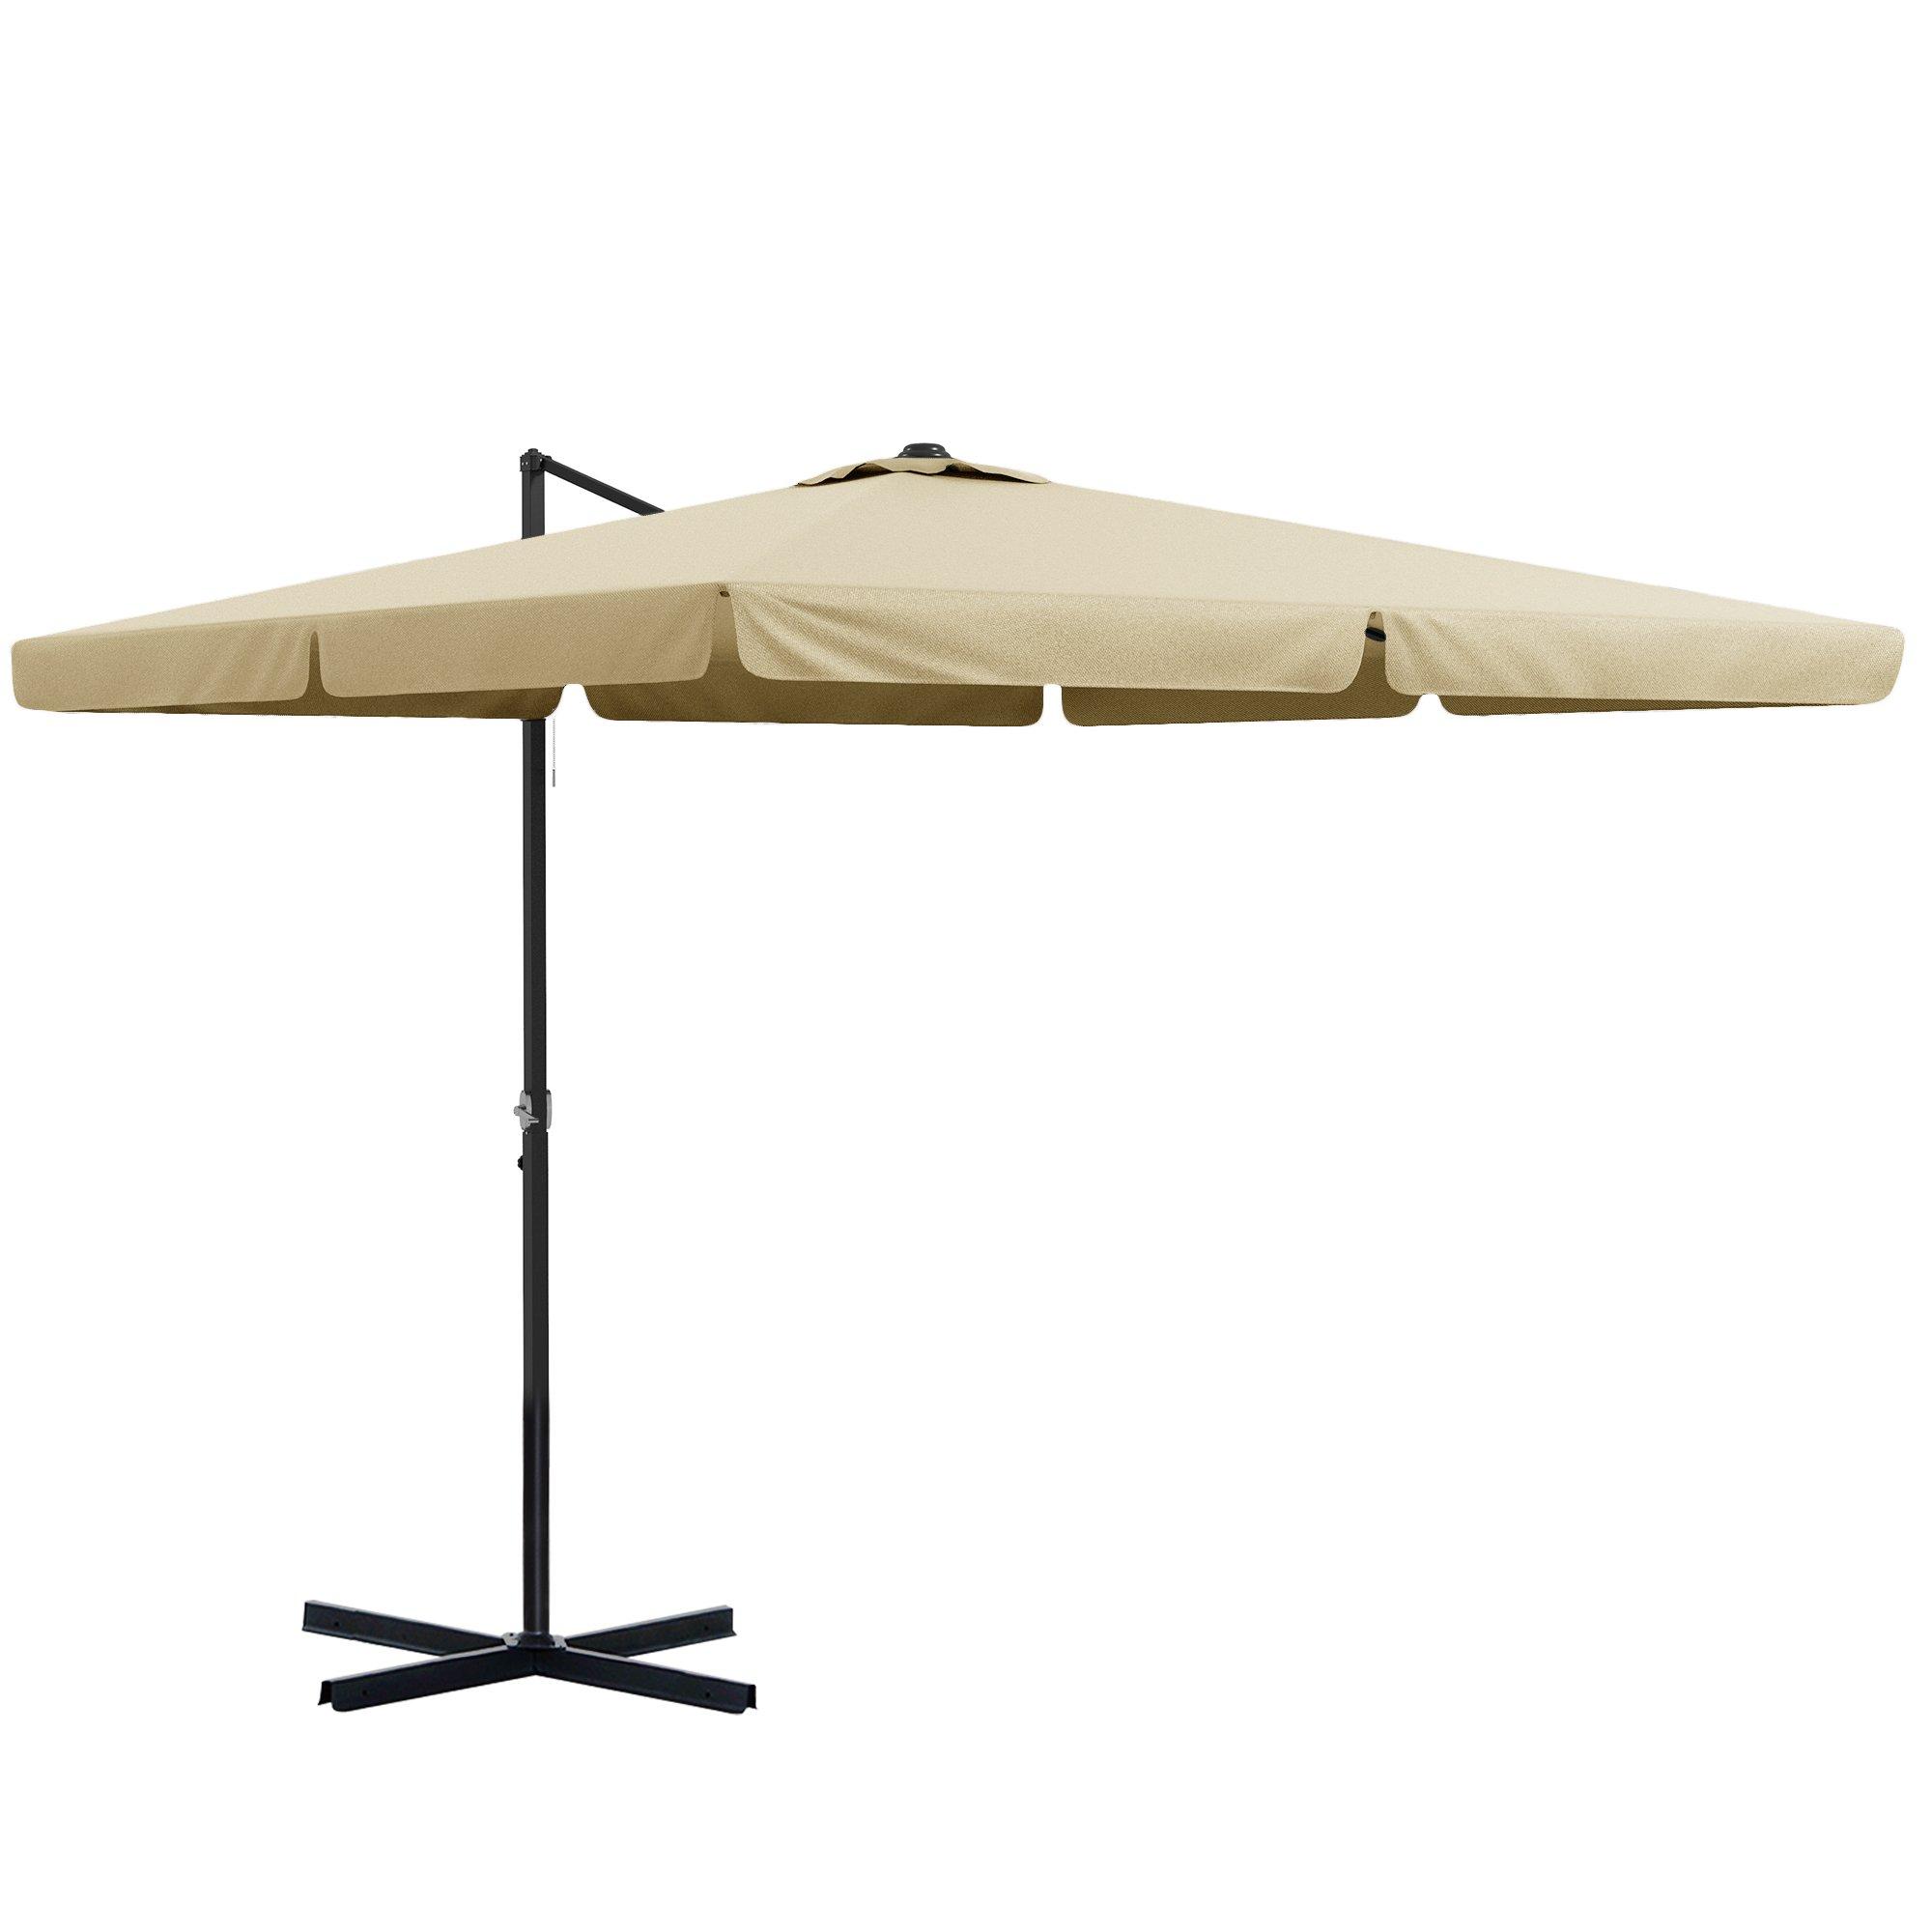 3(m)Cantilever Parasol with Crank Handle and Tilt, Vented Top, Cross Base